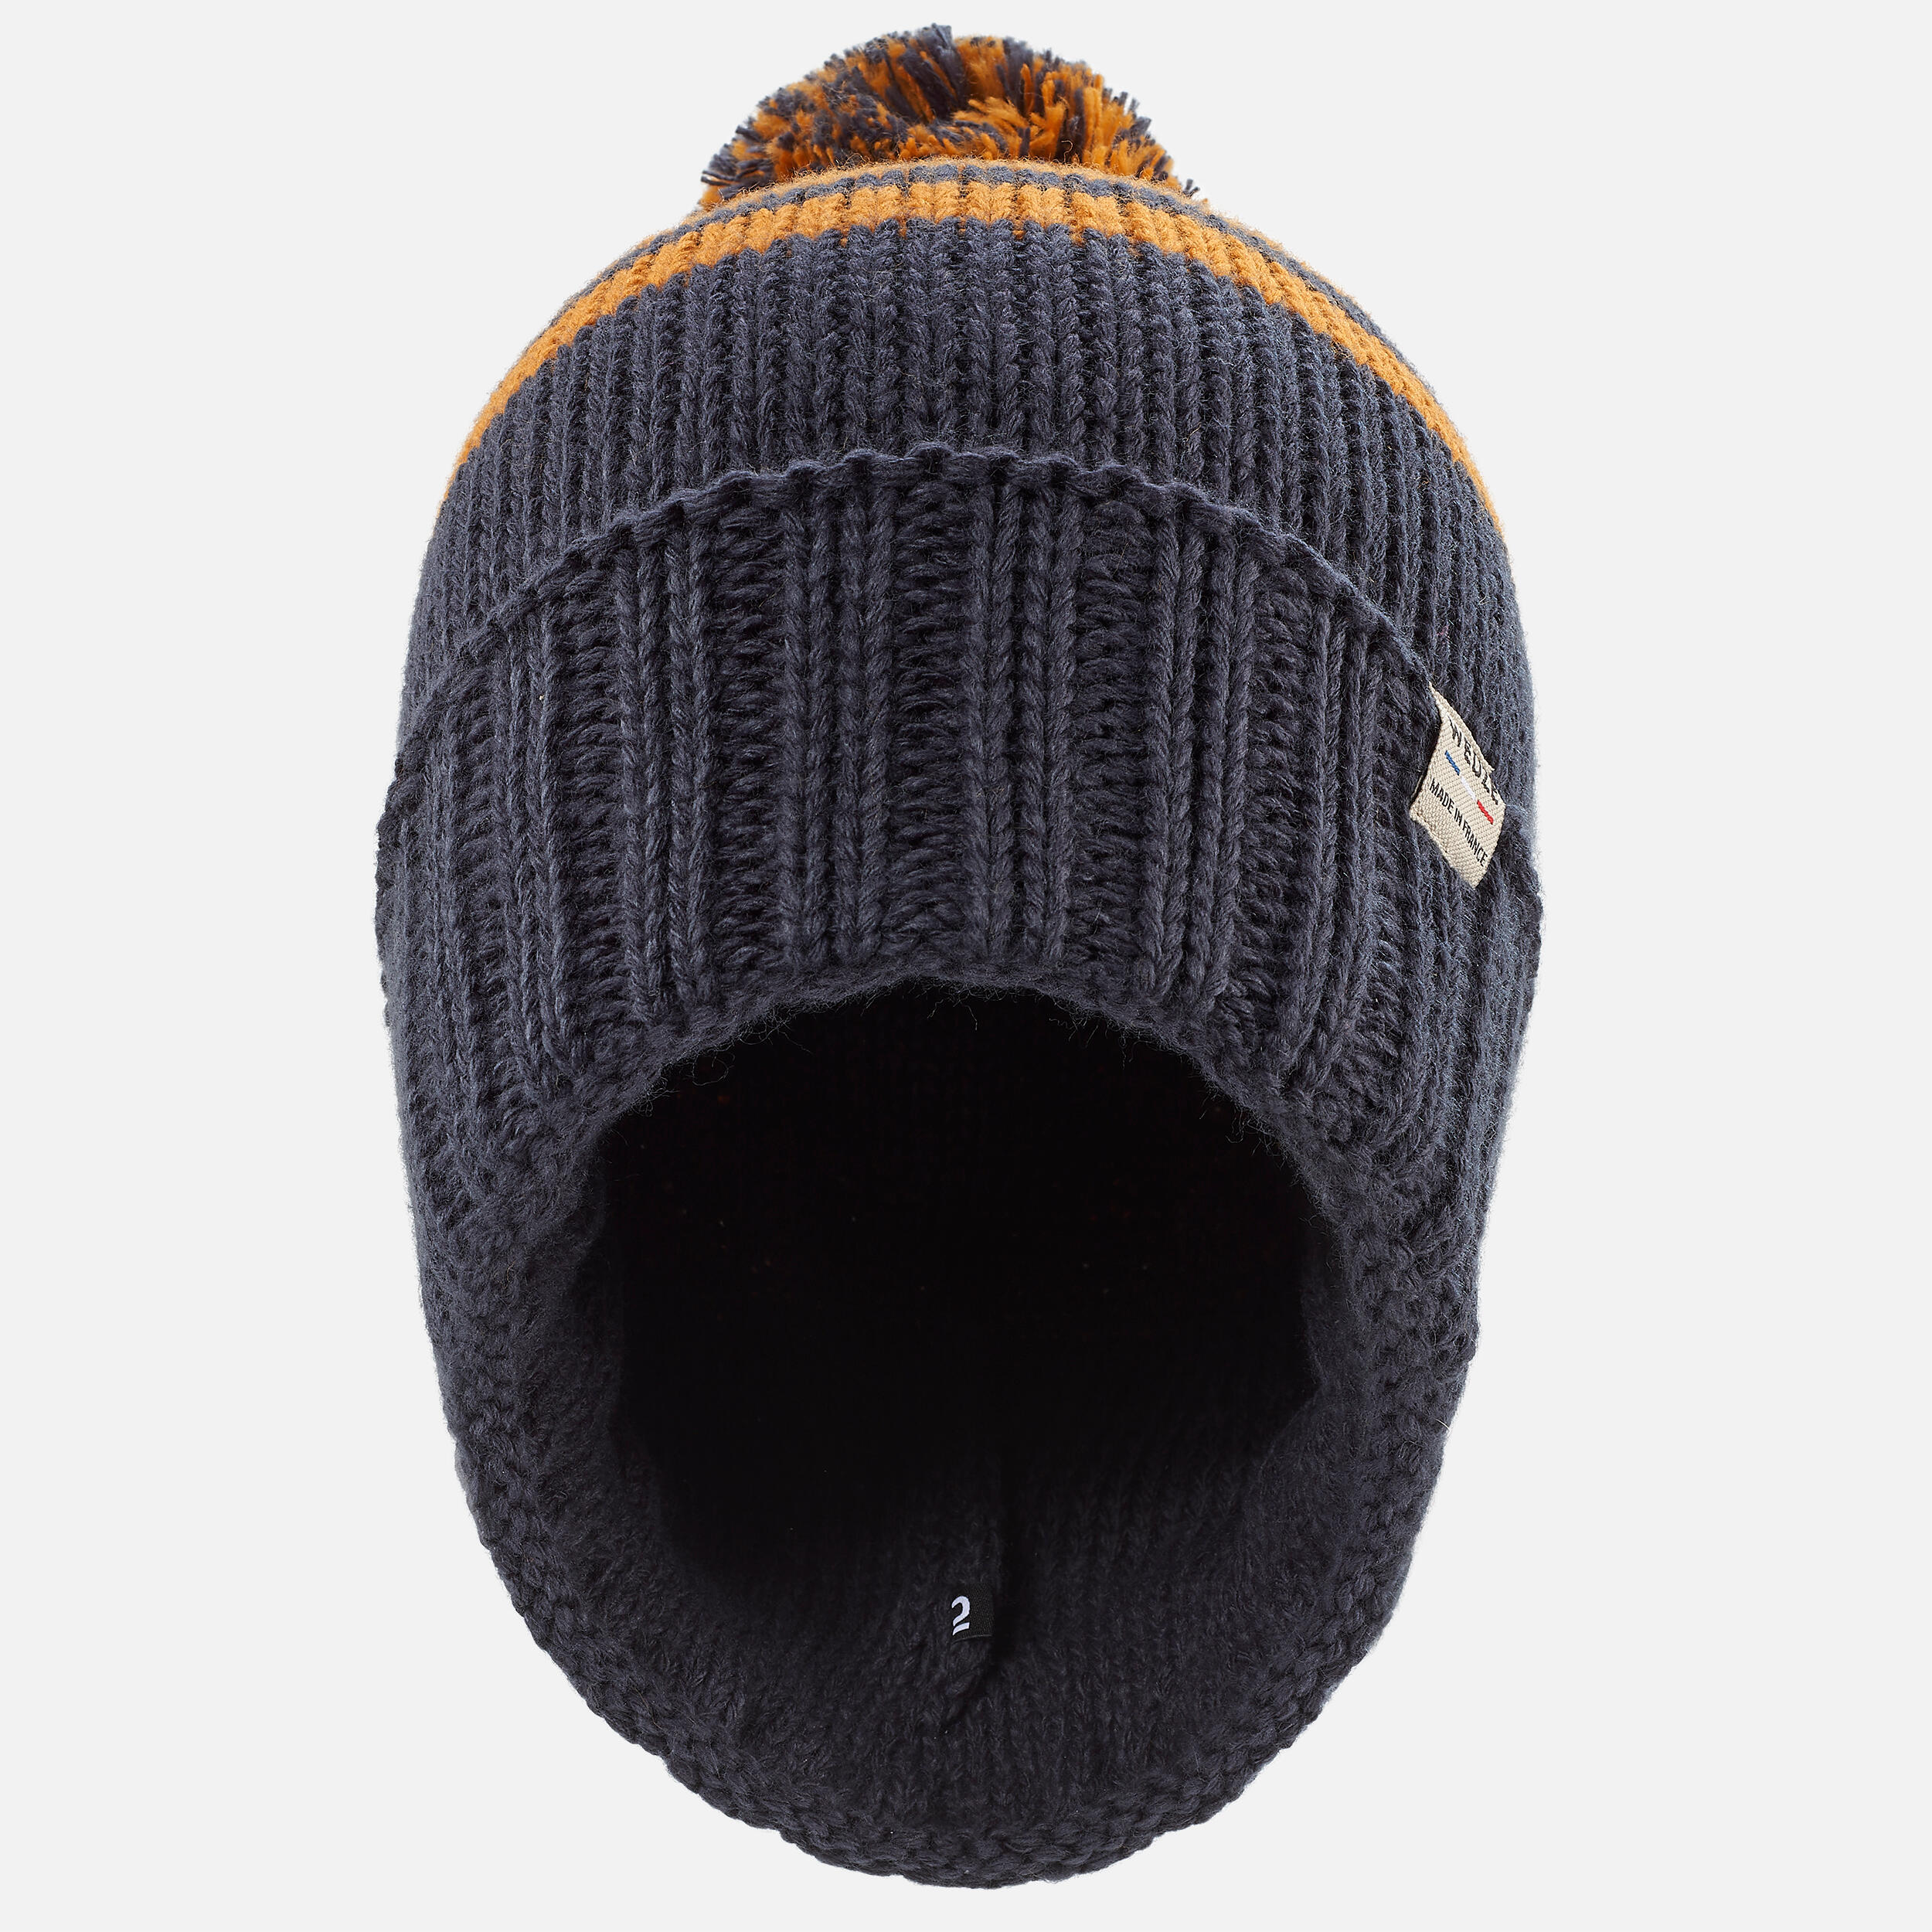 ADULT SKI HAT GRAND NORD MADE IN FRANCE - NAVY BLUE-OCHRE 4/8